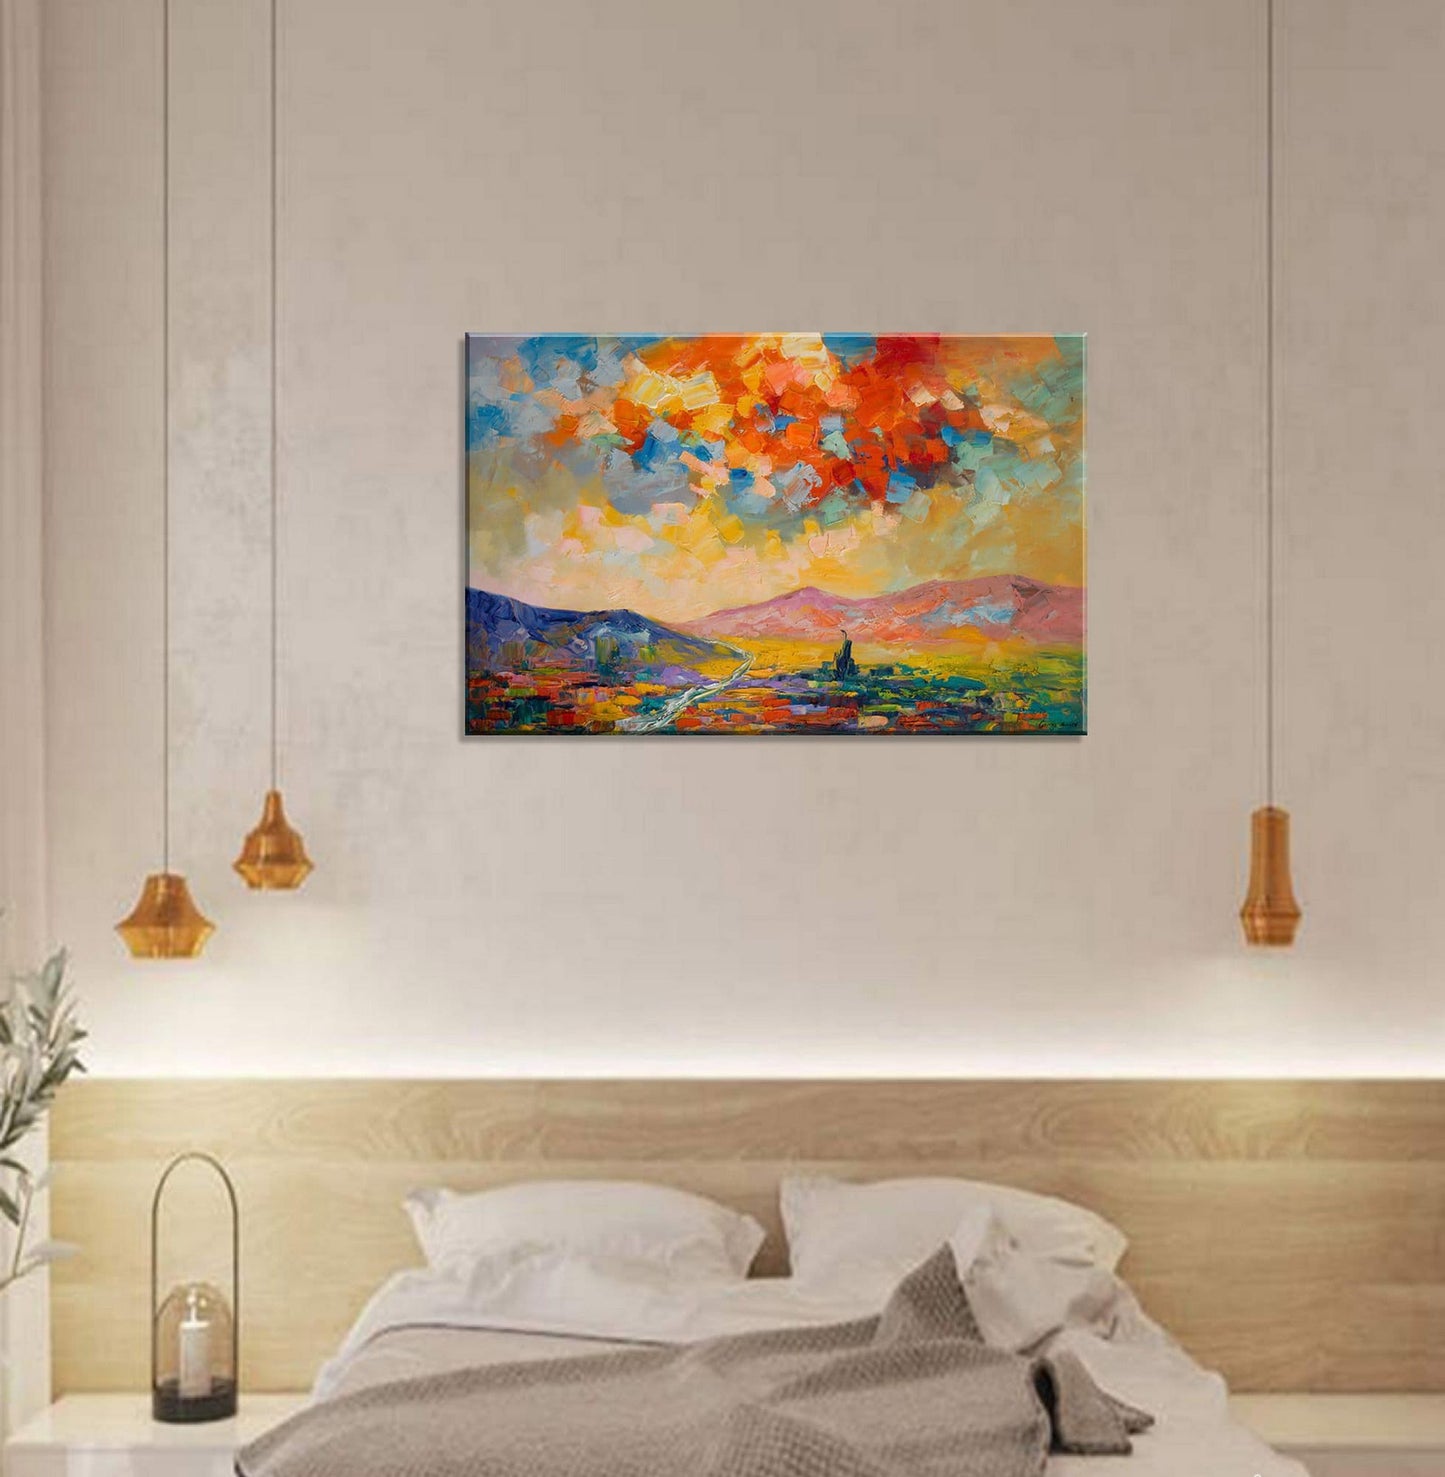 Abstract Landscape Oil Painting Mountain Sunset, Artwork, Oil Painting, Landscape, Large Painting, Handmade Painting, Contemporary Art